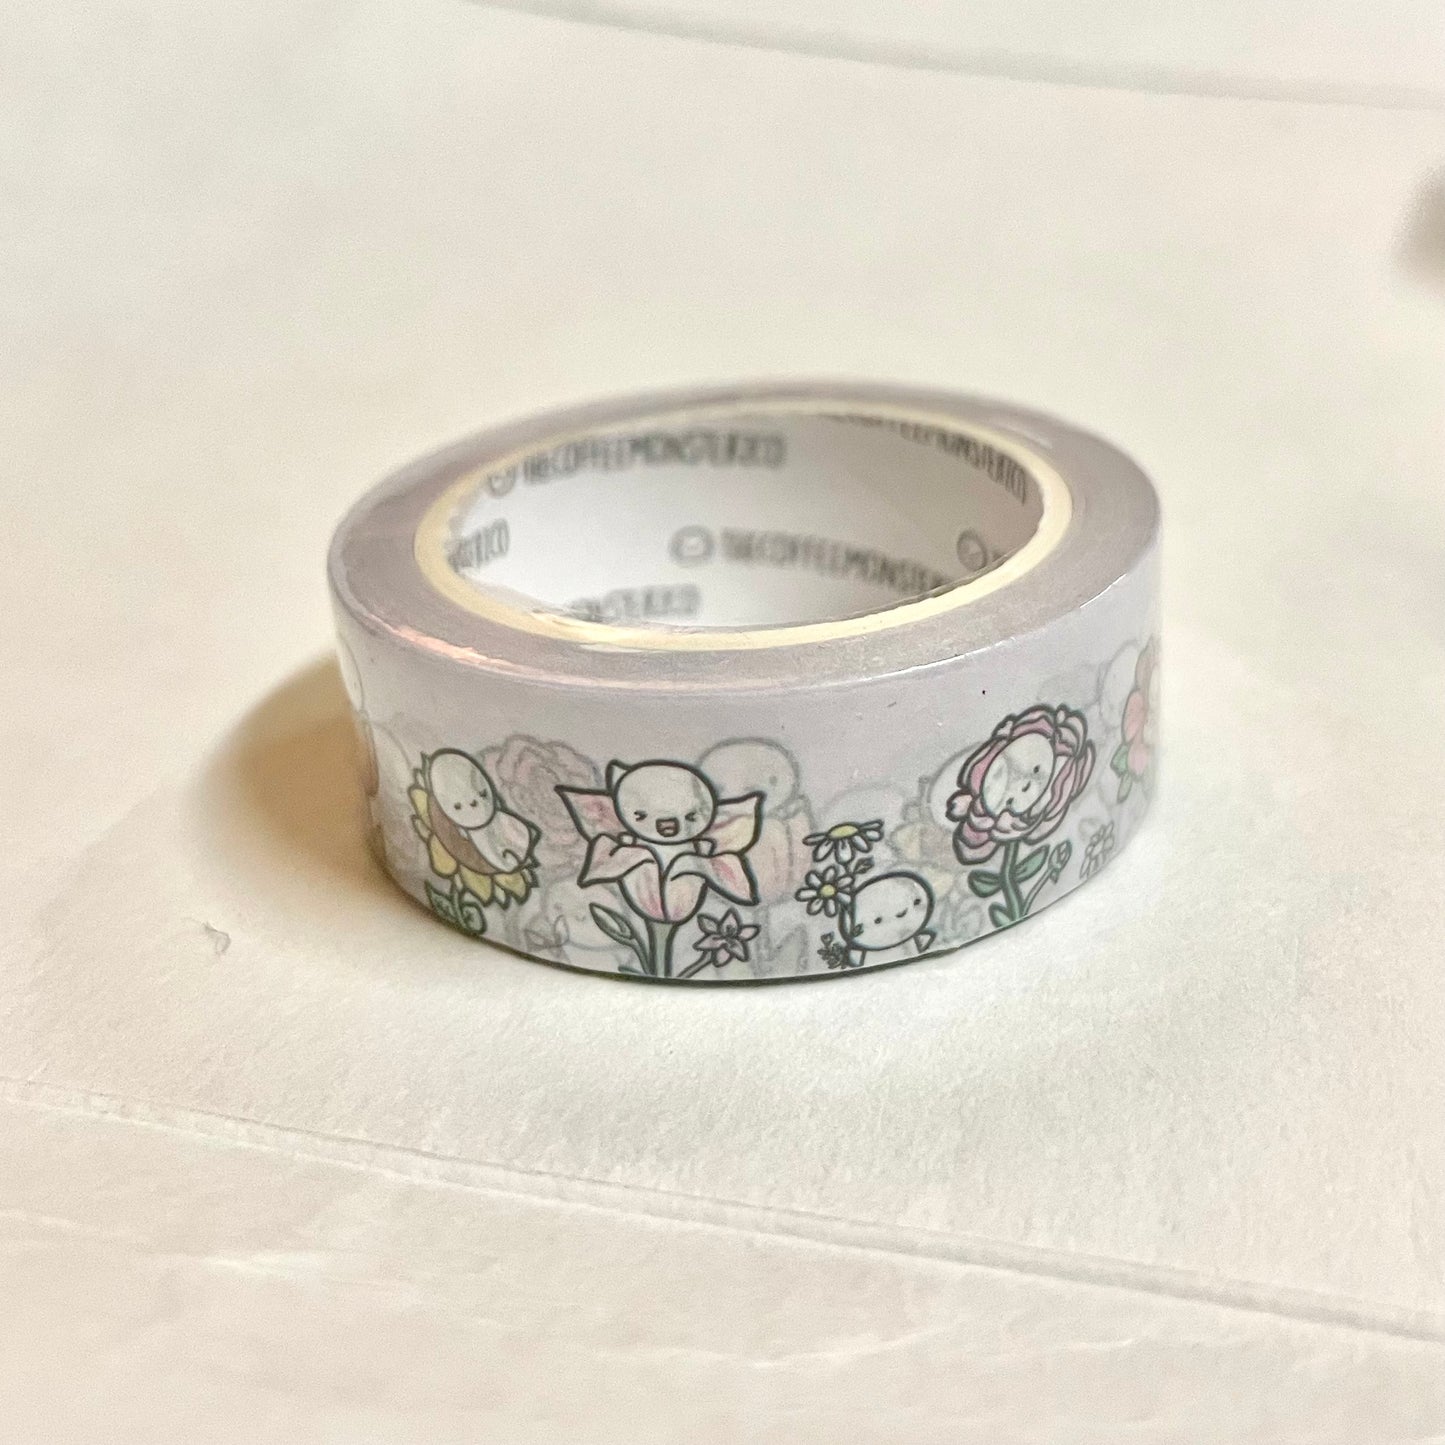 TheCoffeeMonsterzCO Floral Forest 2.0 Washi Tape